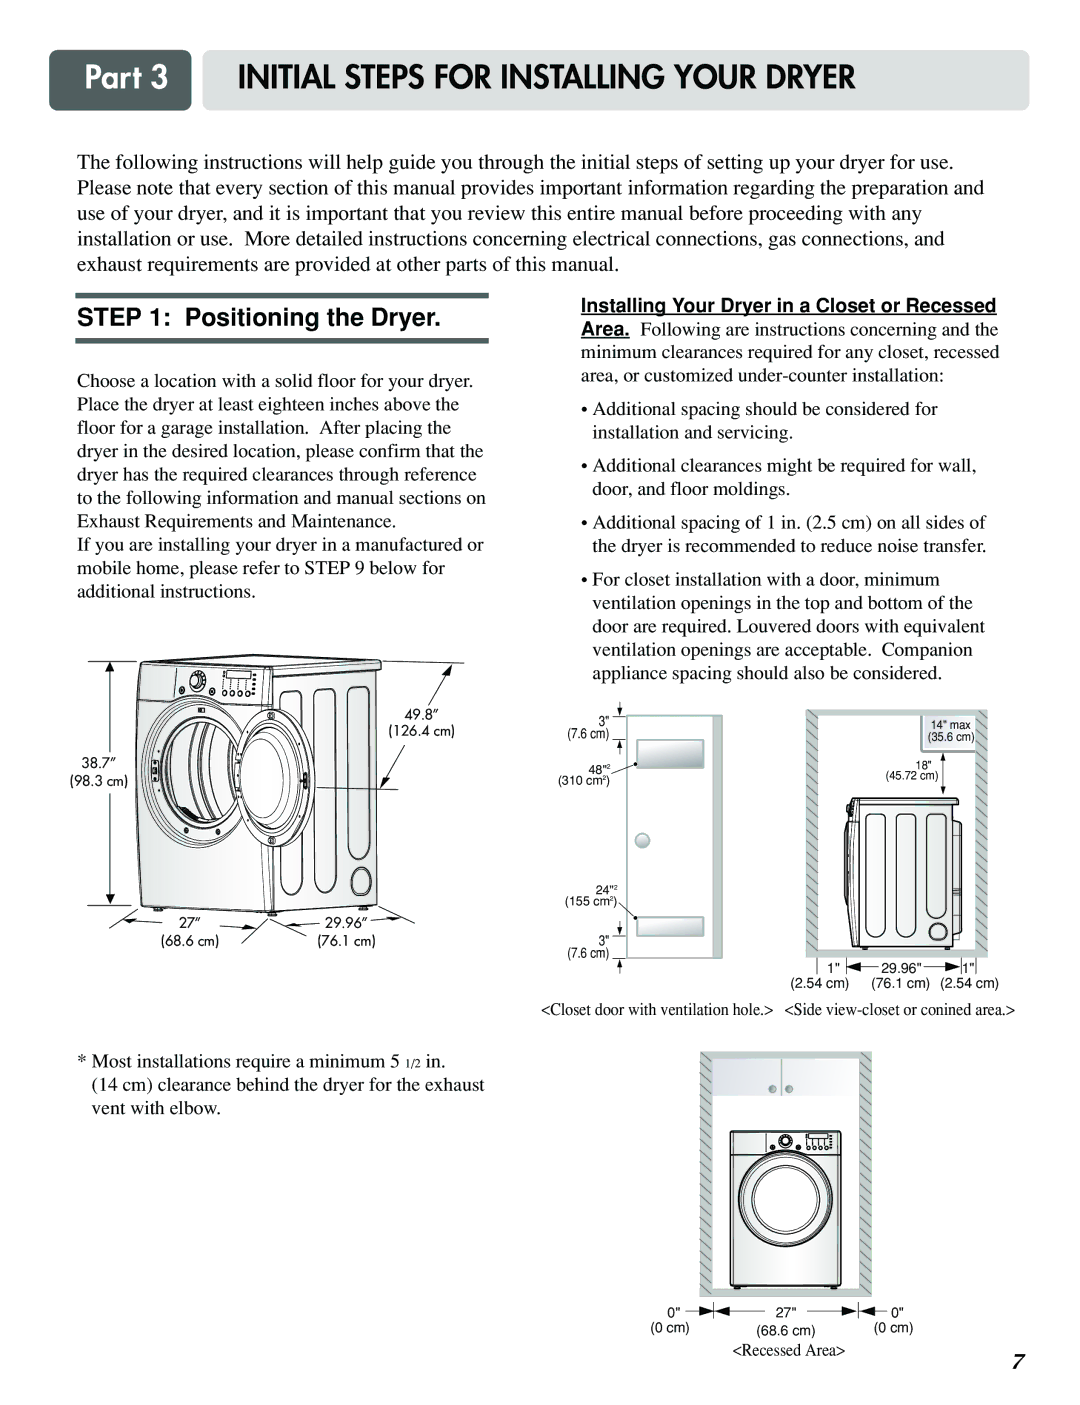 LG Electronics D3788W, D5988B, D5988W manual Part 3 Initial Steps for Installing Your Dryer, Positioning the Dryer 